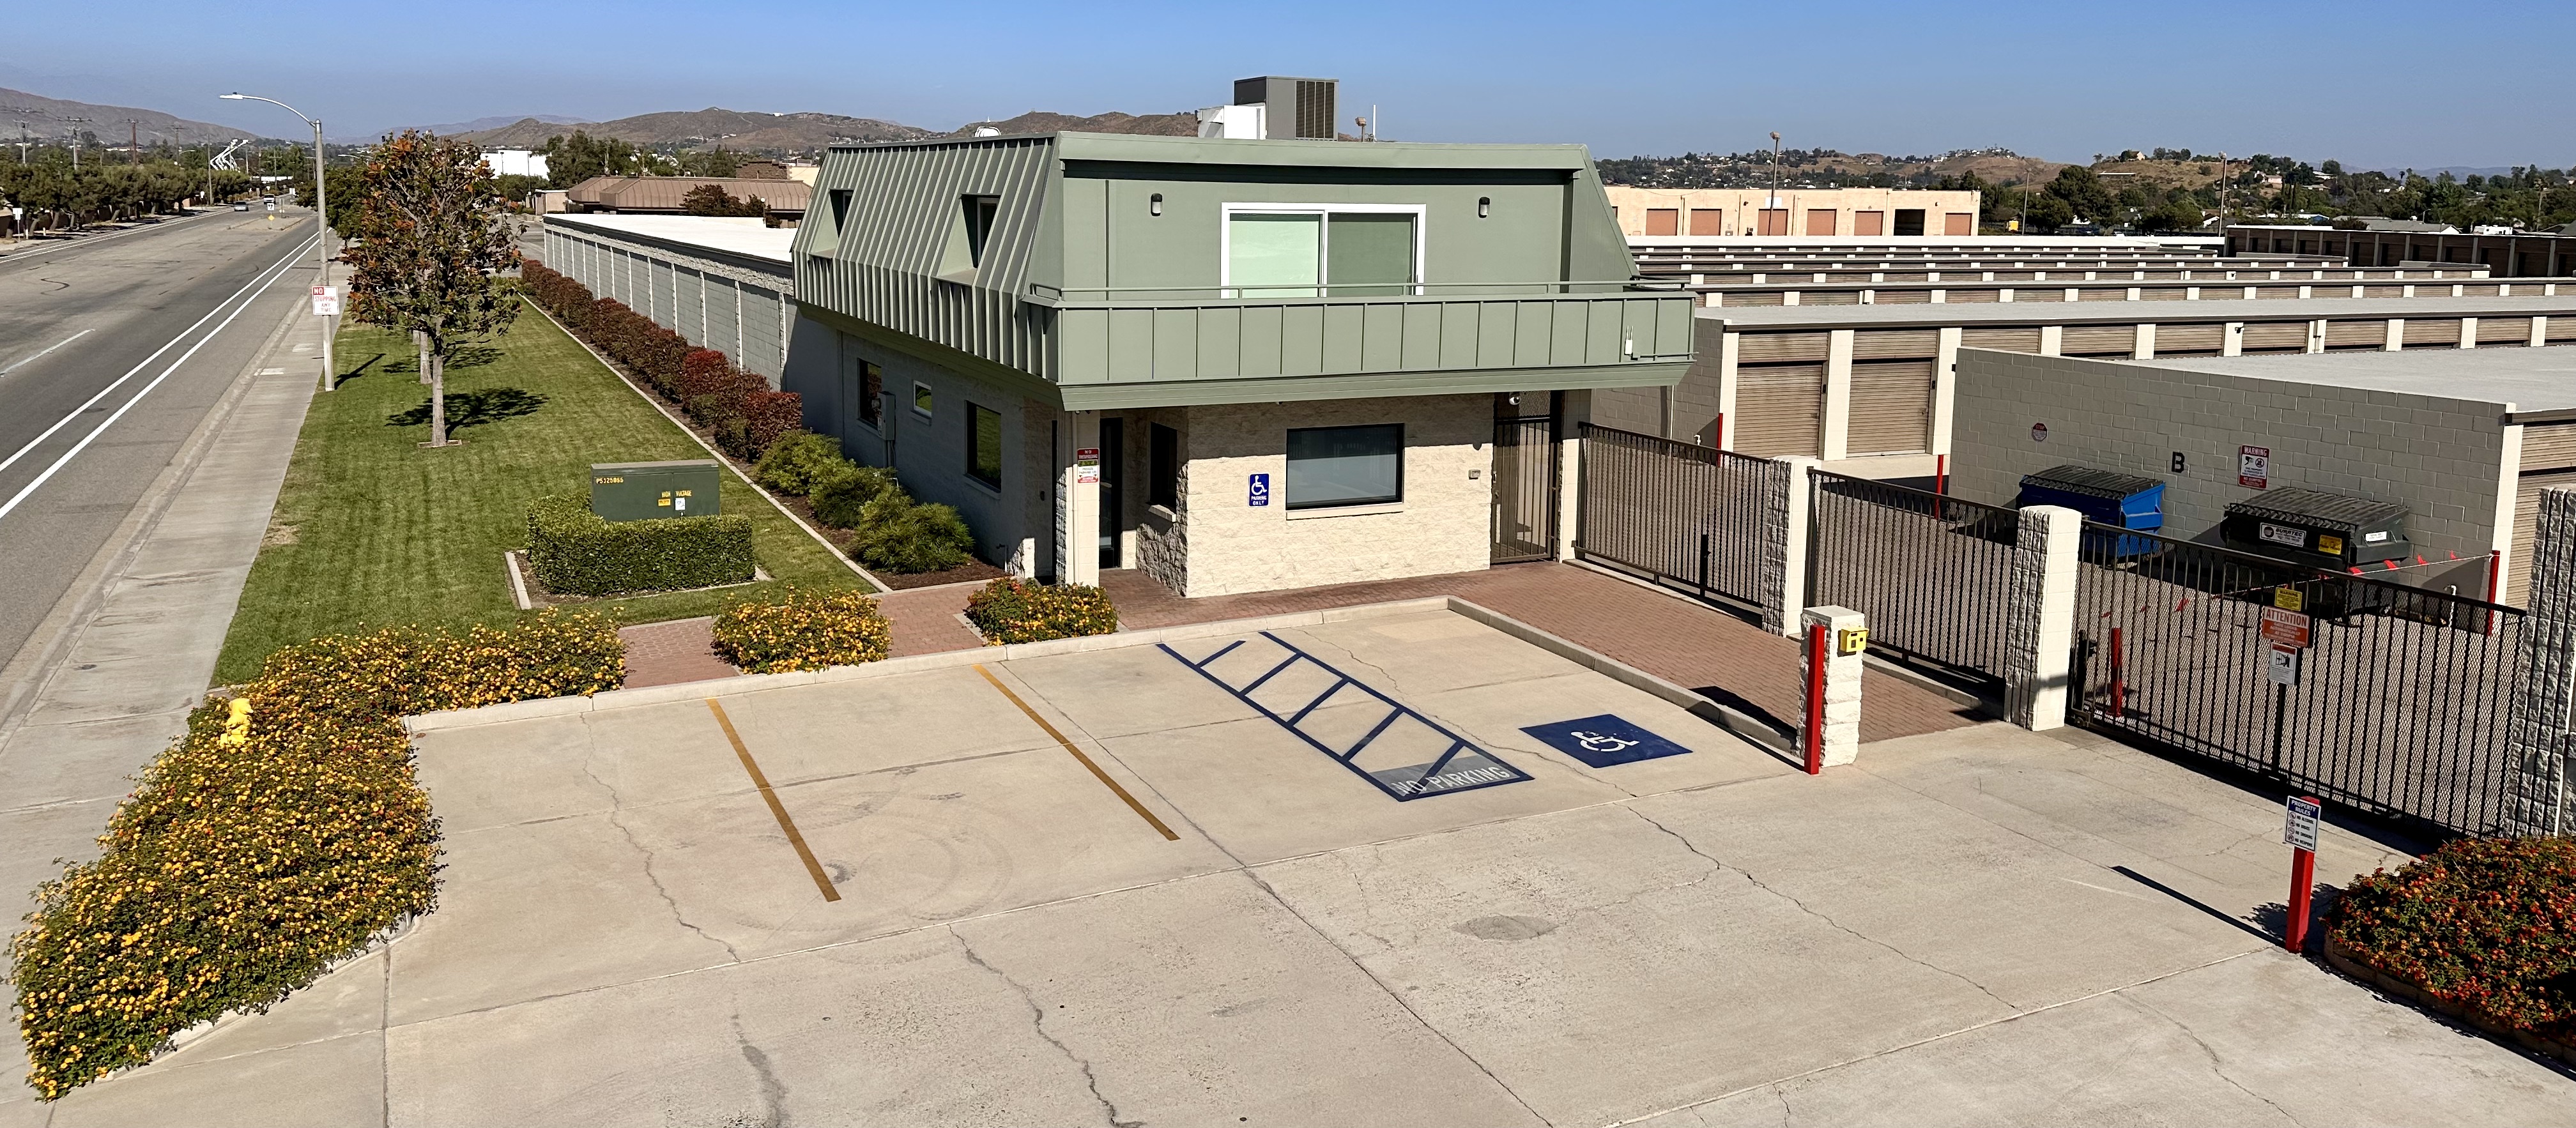 Office and enclosed units overview Jurupa Valley, CA